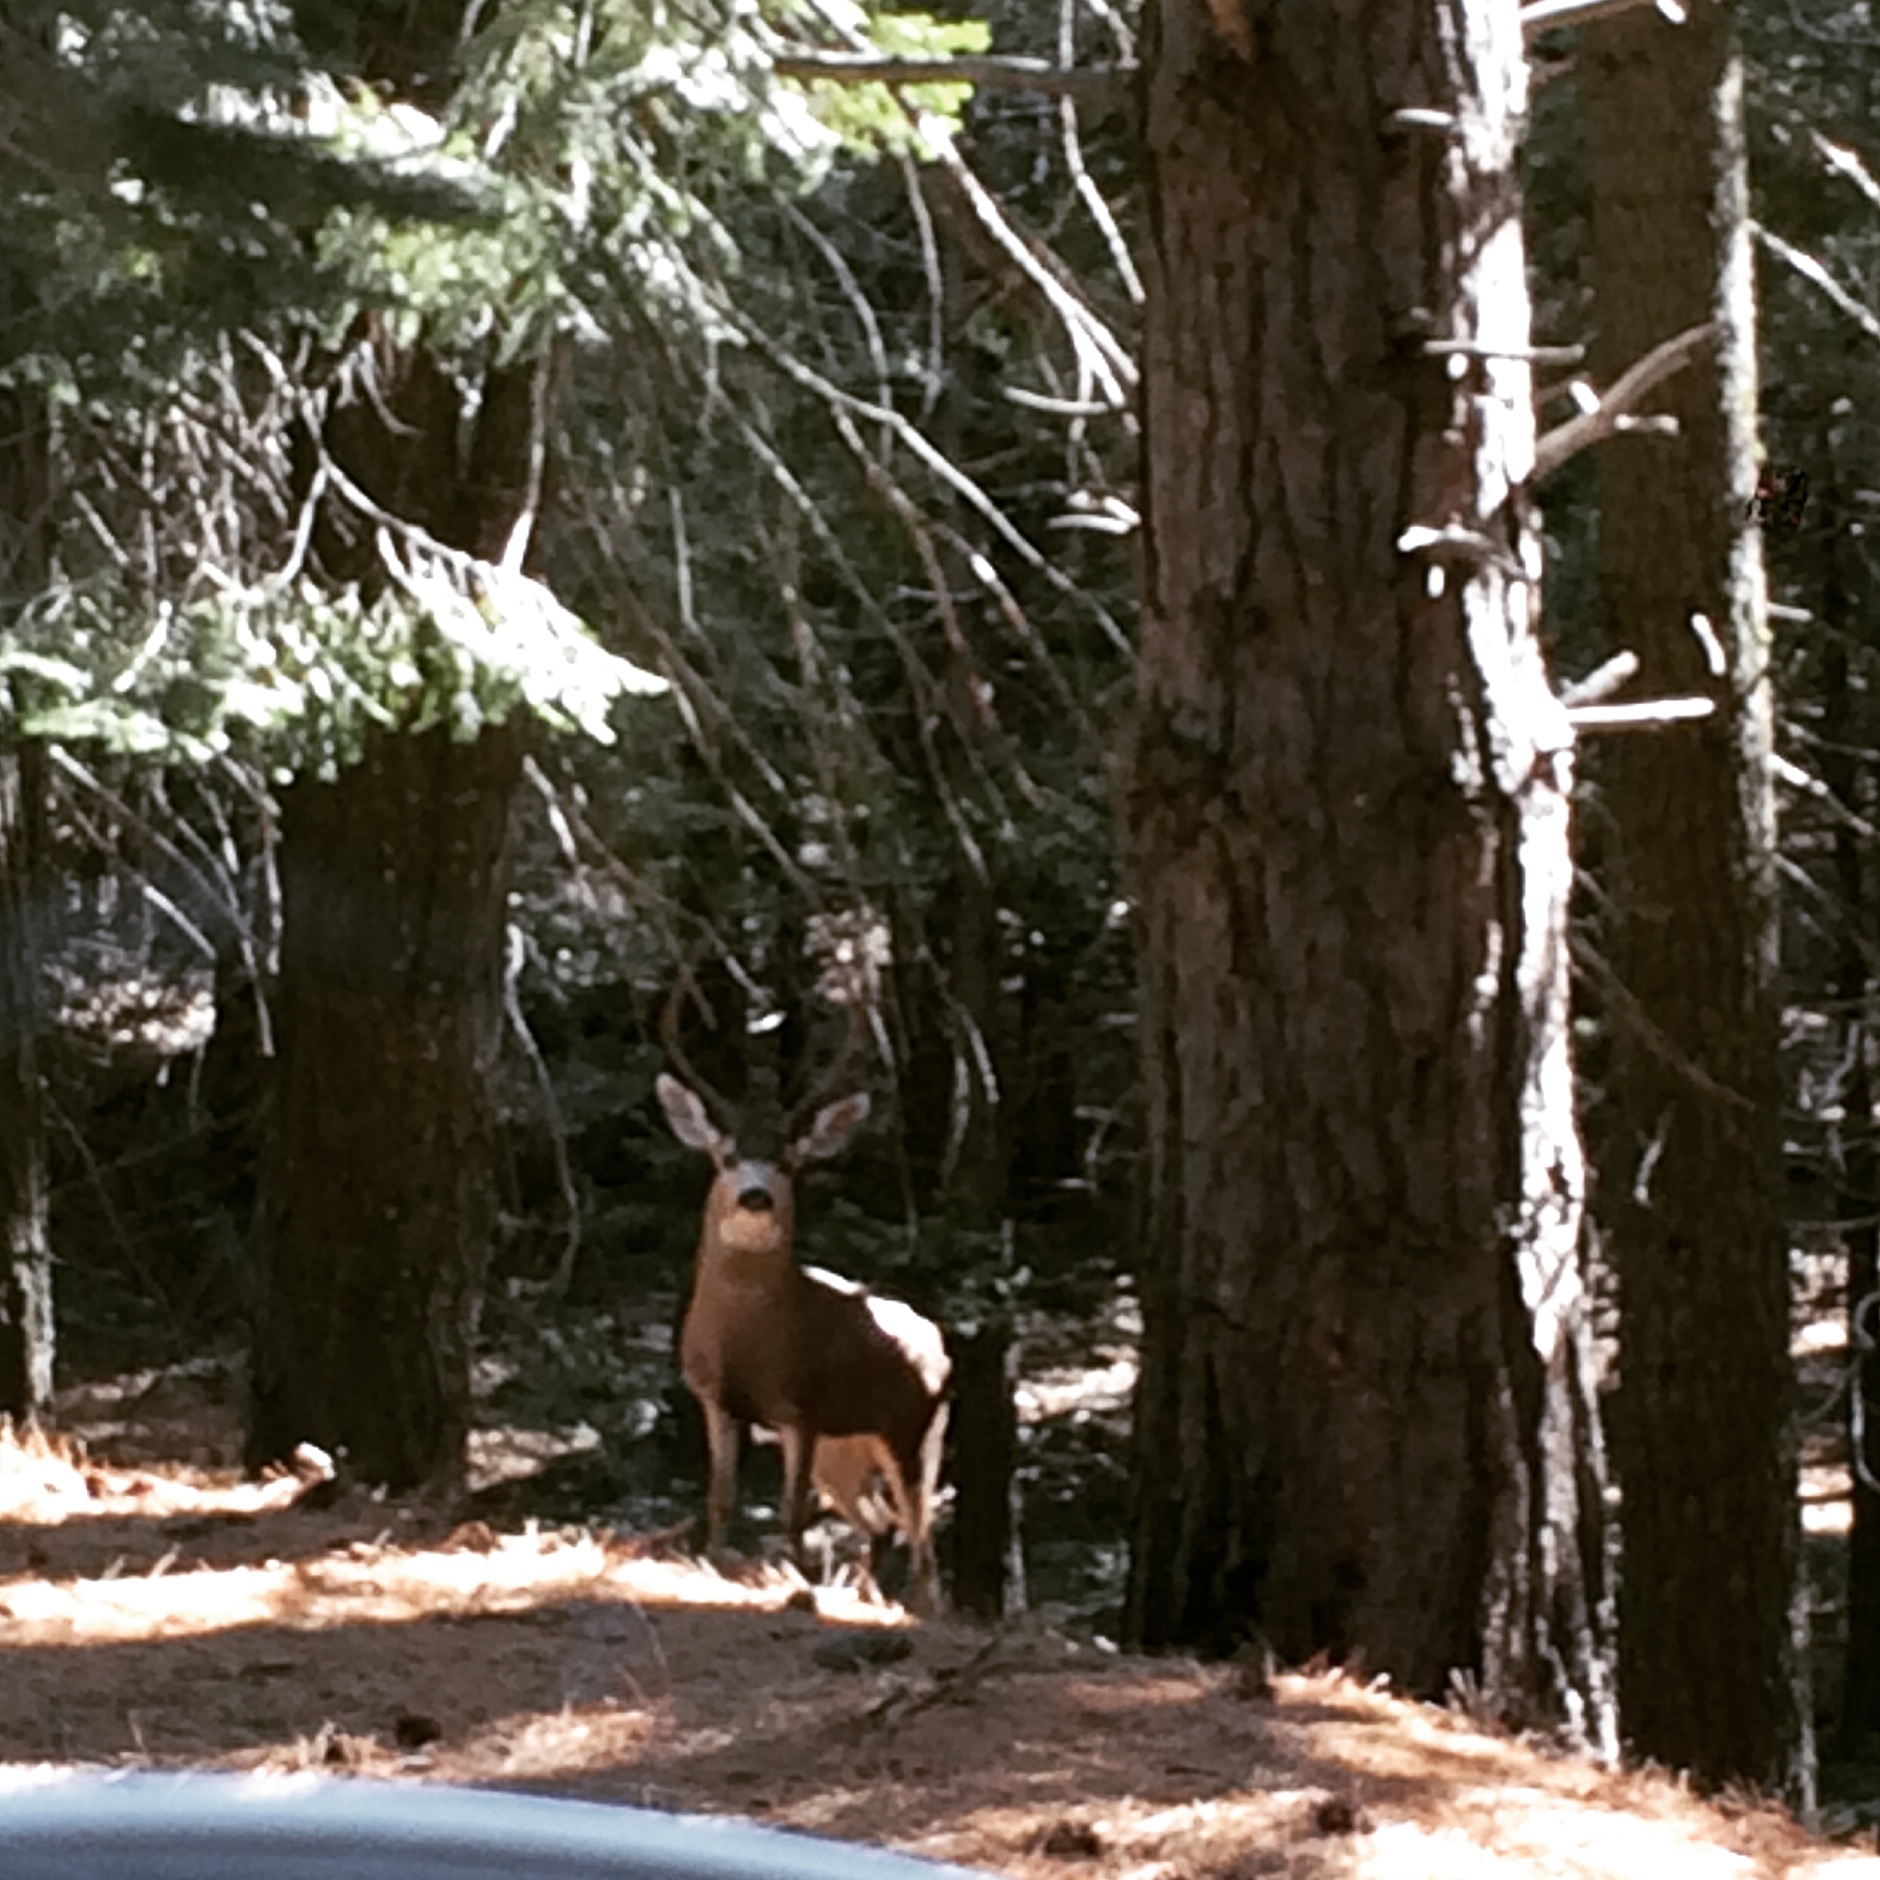 Deer family - driving in to Yosemite National Park